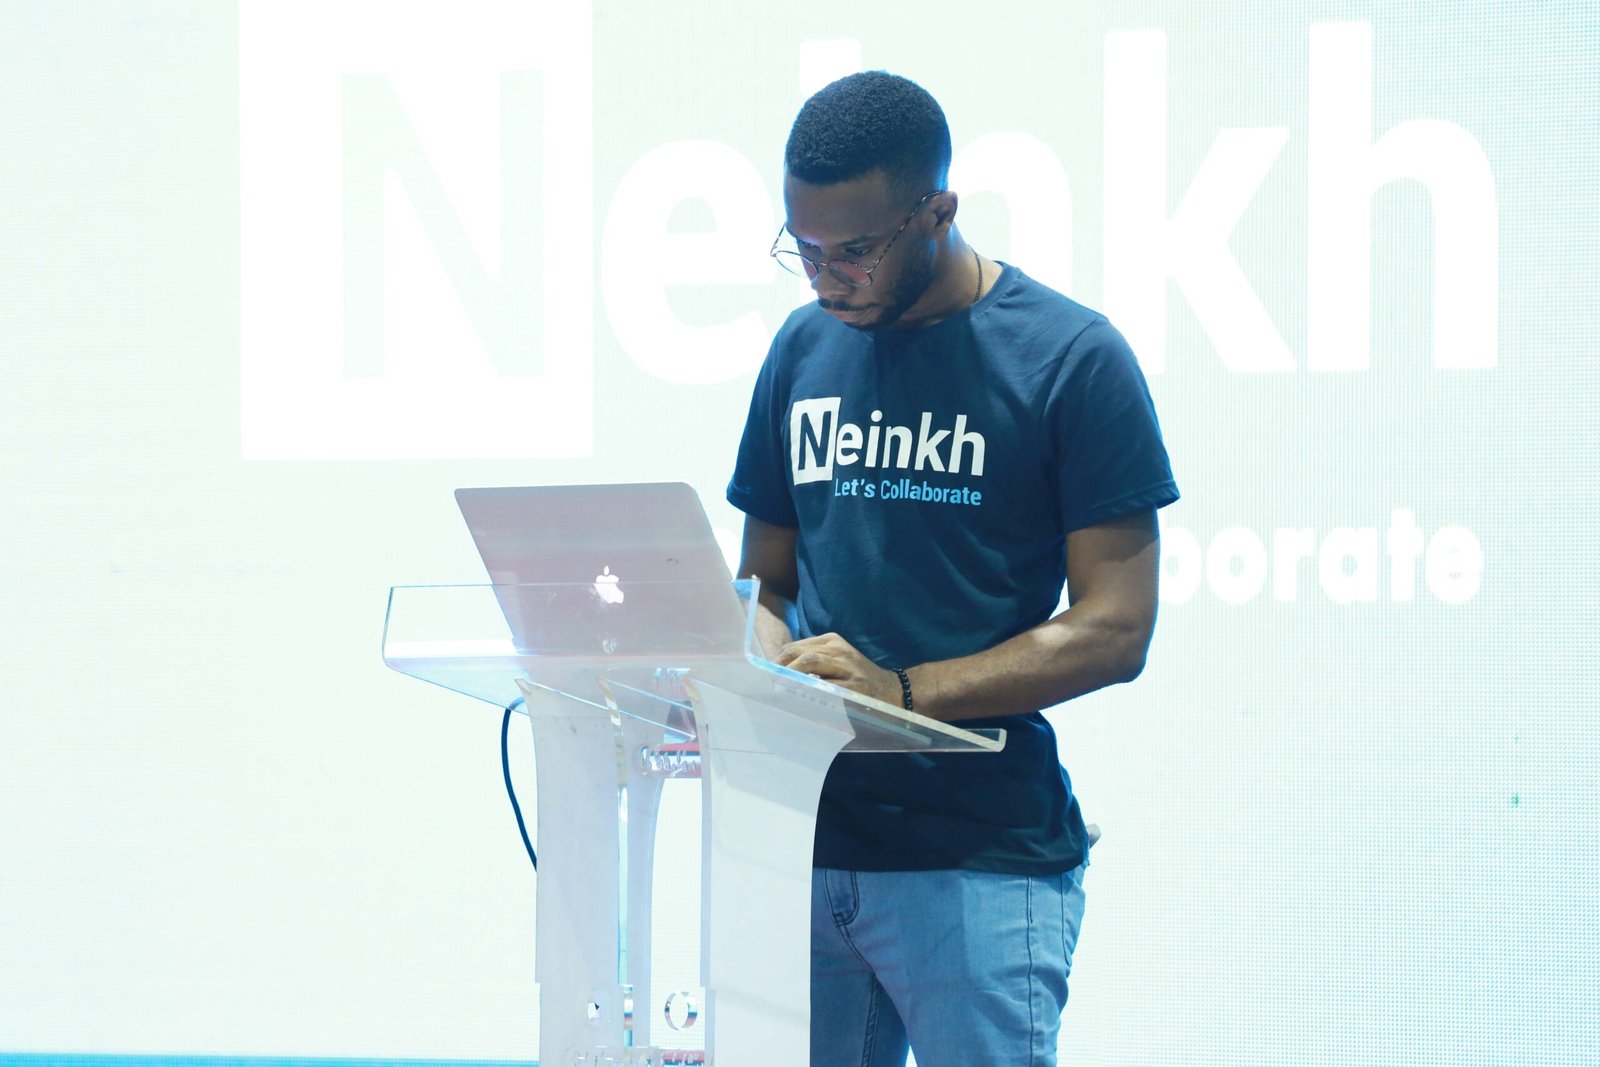 Launch of my app called Neinkh